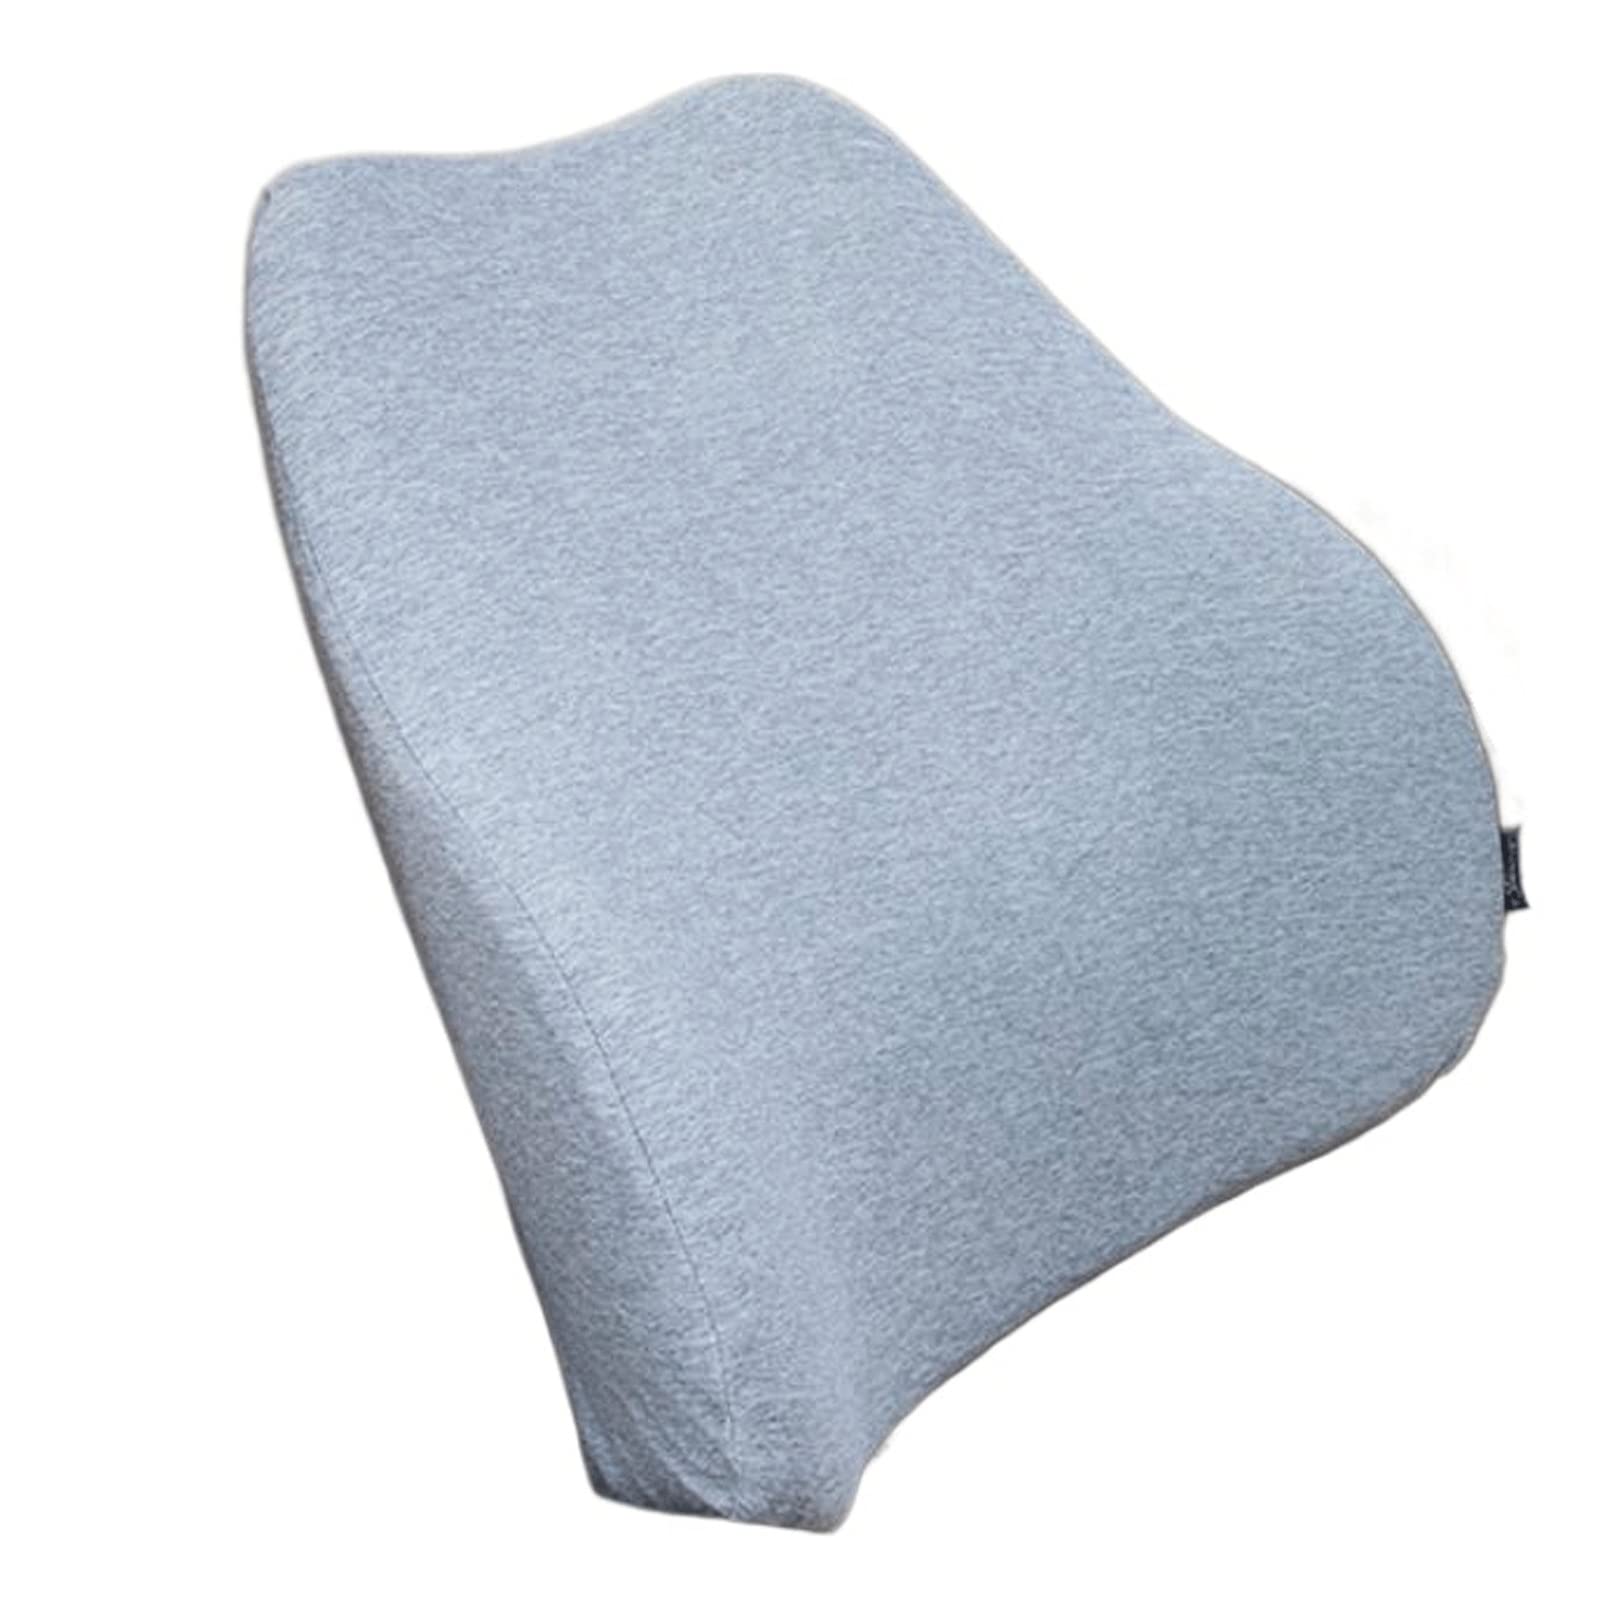 KIFRAL Neck Pillow Soft Car Pillow Lumbar Support Cushion Car Seat Cushion Memory Foam Polyester Back Cushion Relief Pillow (Color : 5)